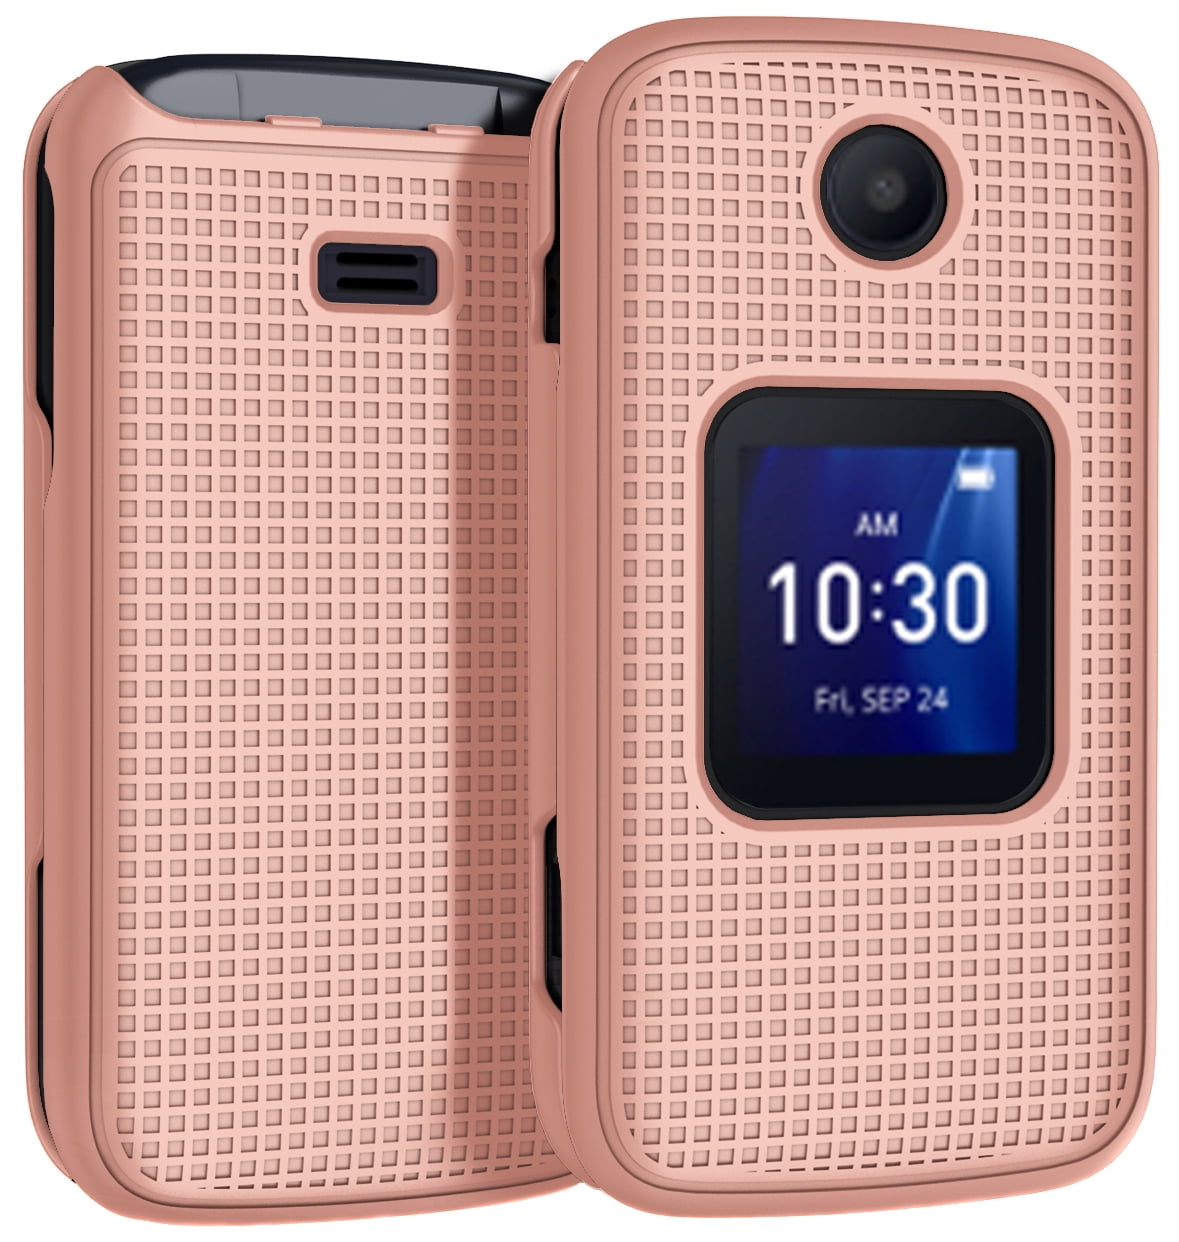 Case for Alcatel Go Flip 4 / TCL Flip Pro Phone, Nakedcellphone Slim Hard  Shell Protector Cover with Grid Texture - Rose Gold Pink 